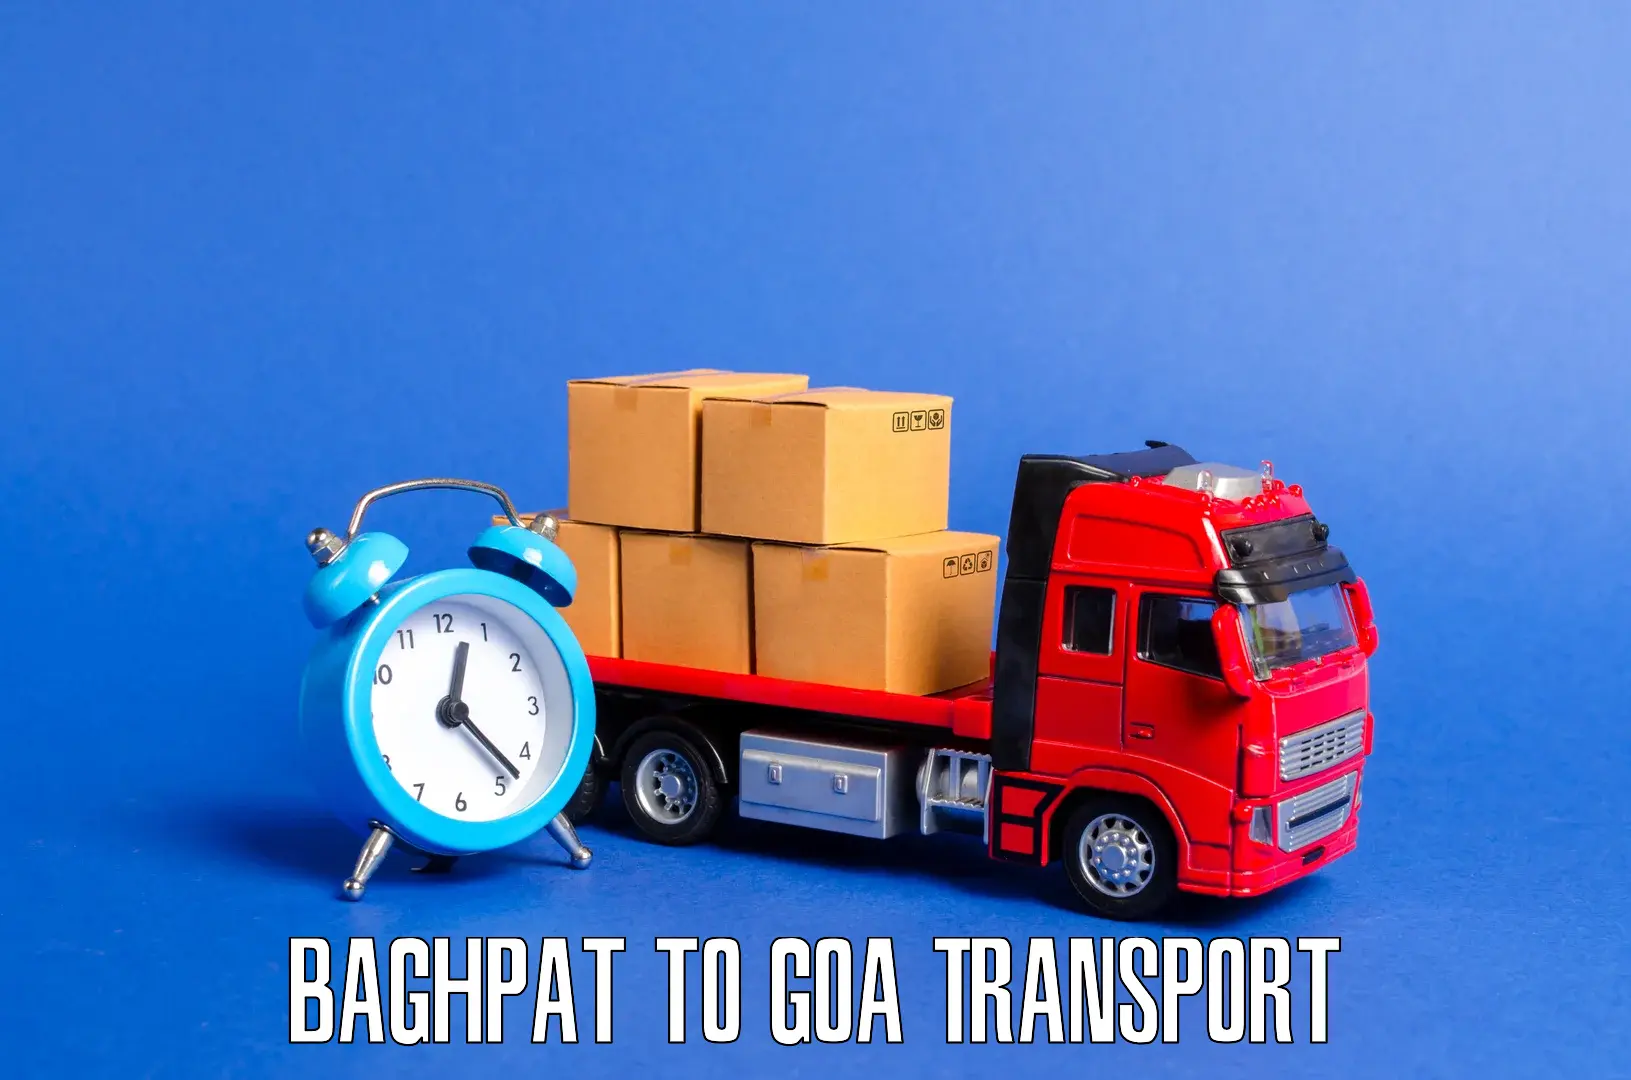 Cargo train transport services in Baghpat to Canacona